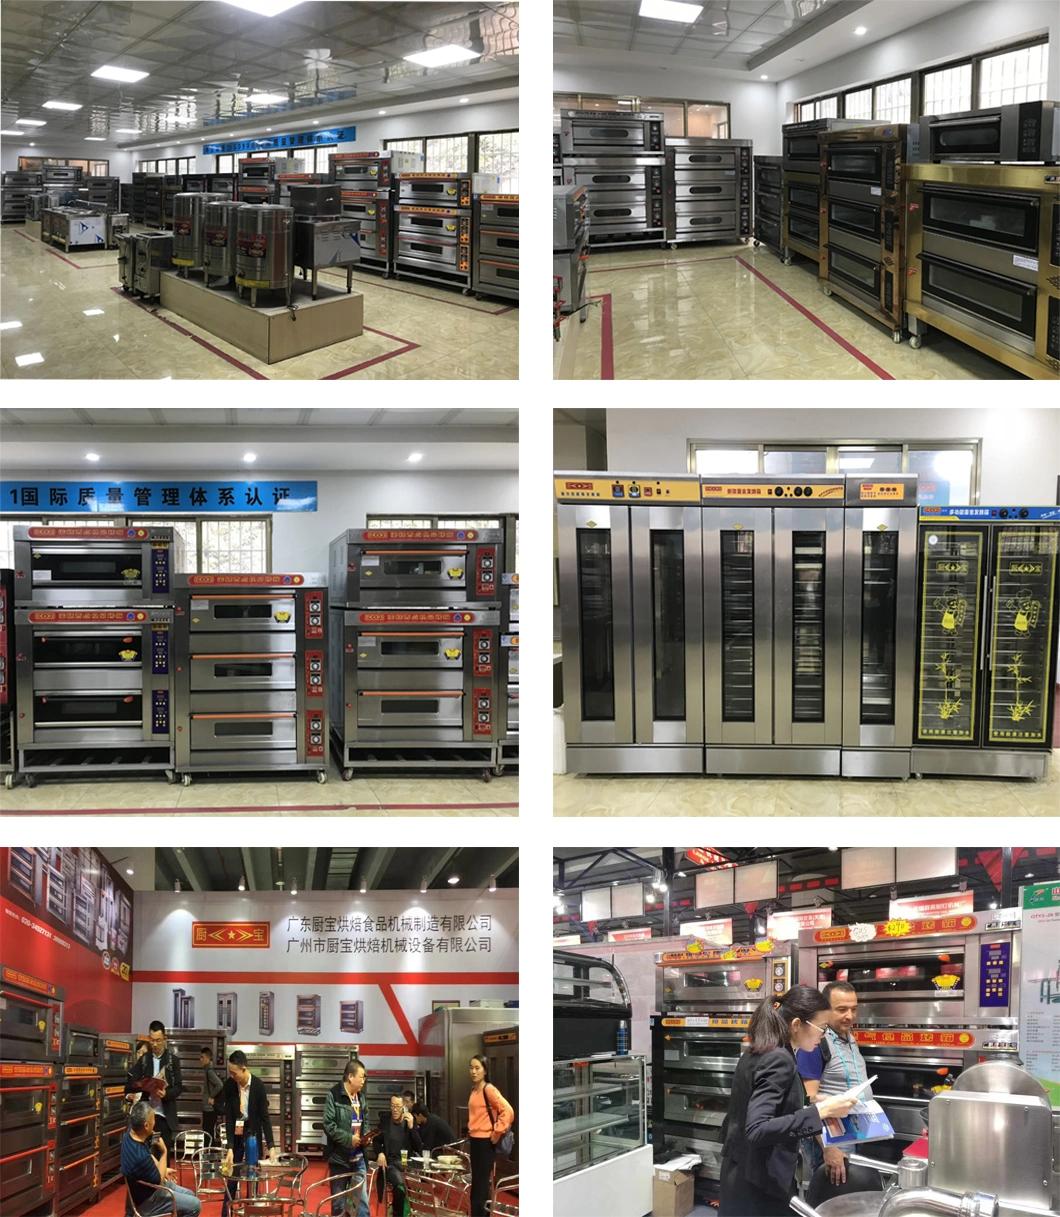 1 Deck 2 Trays Gas Oven with Computer Controller for Commercial Restaurant Kitchen Baking Equipment Bakery Machine Food Equipment